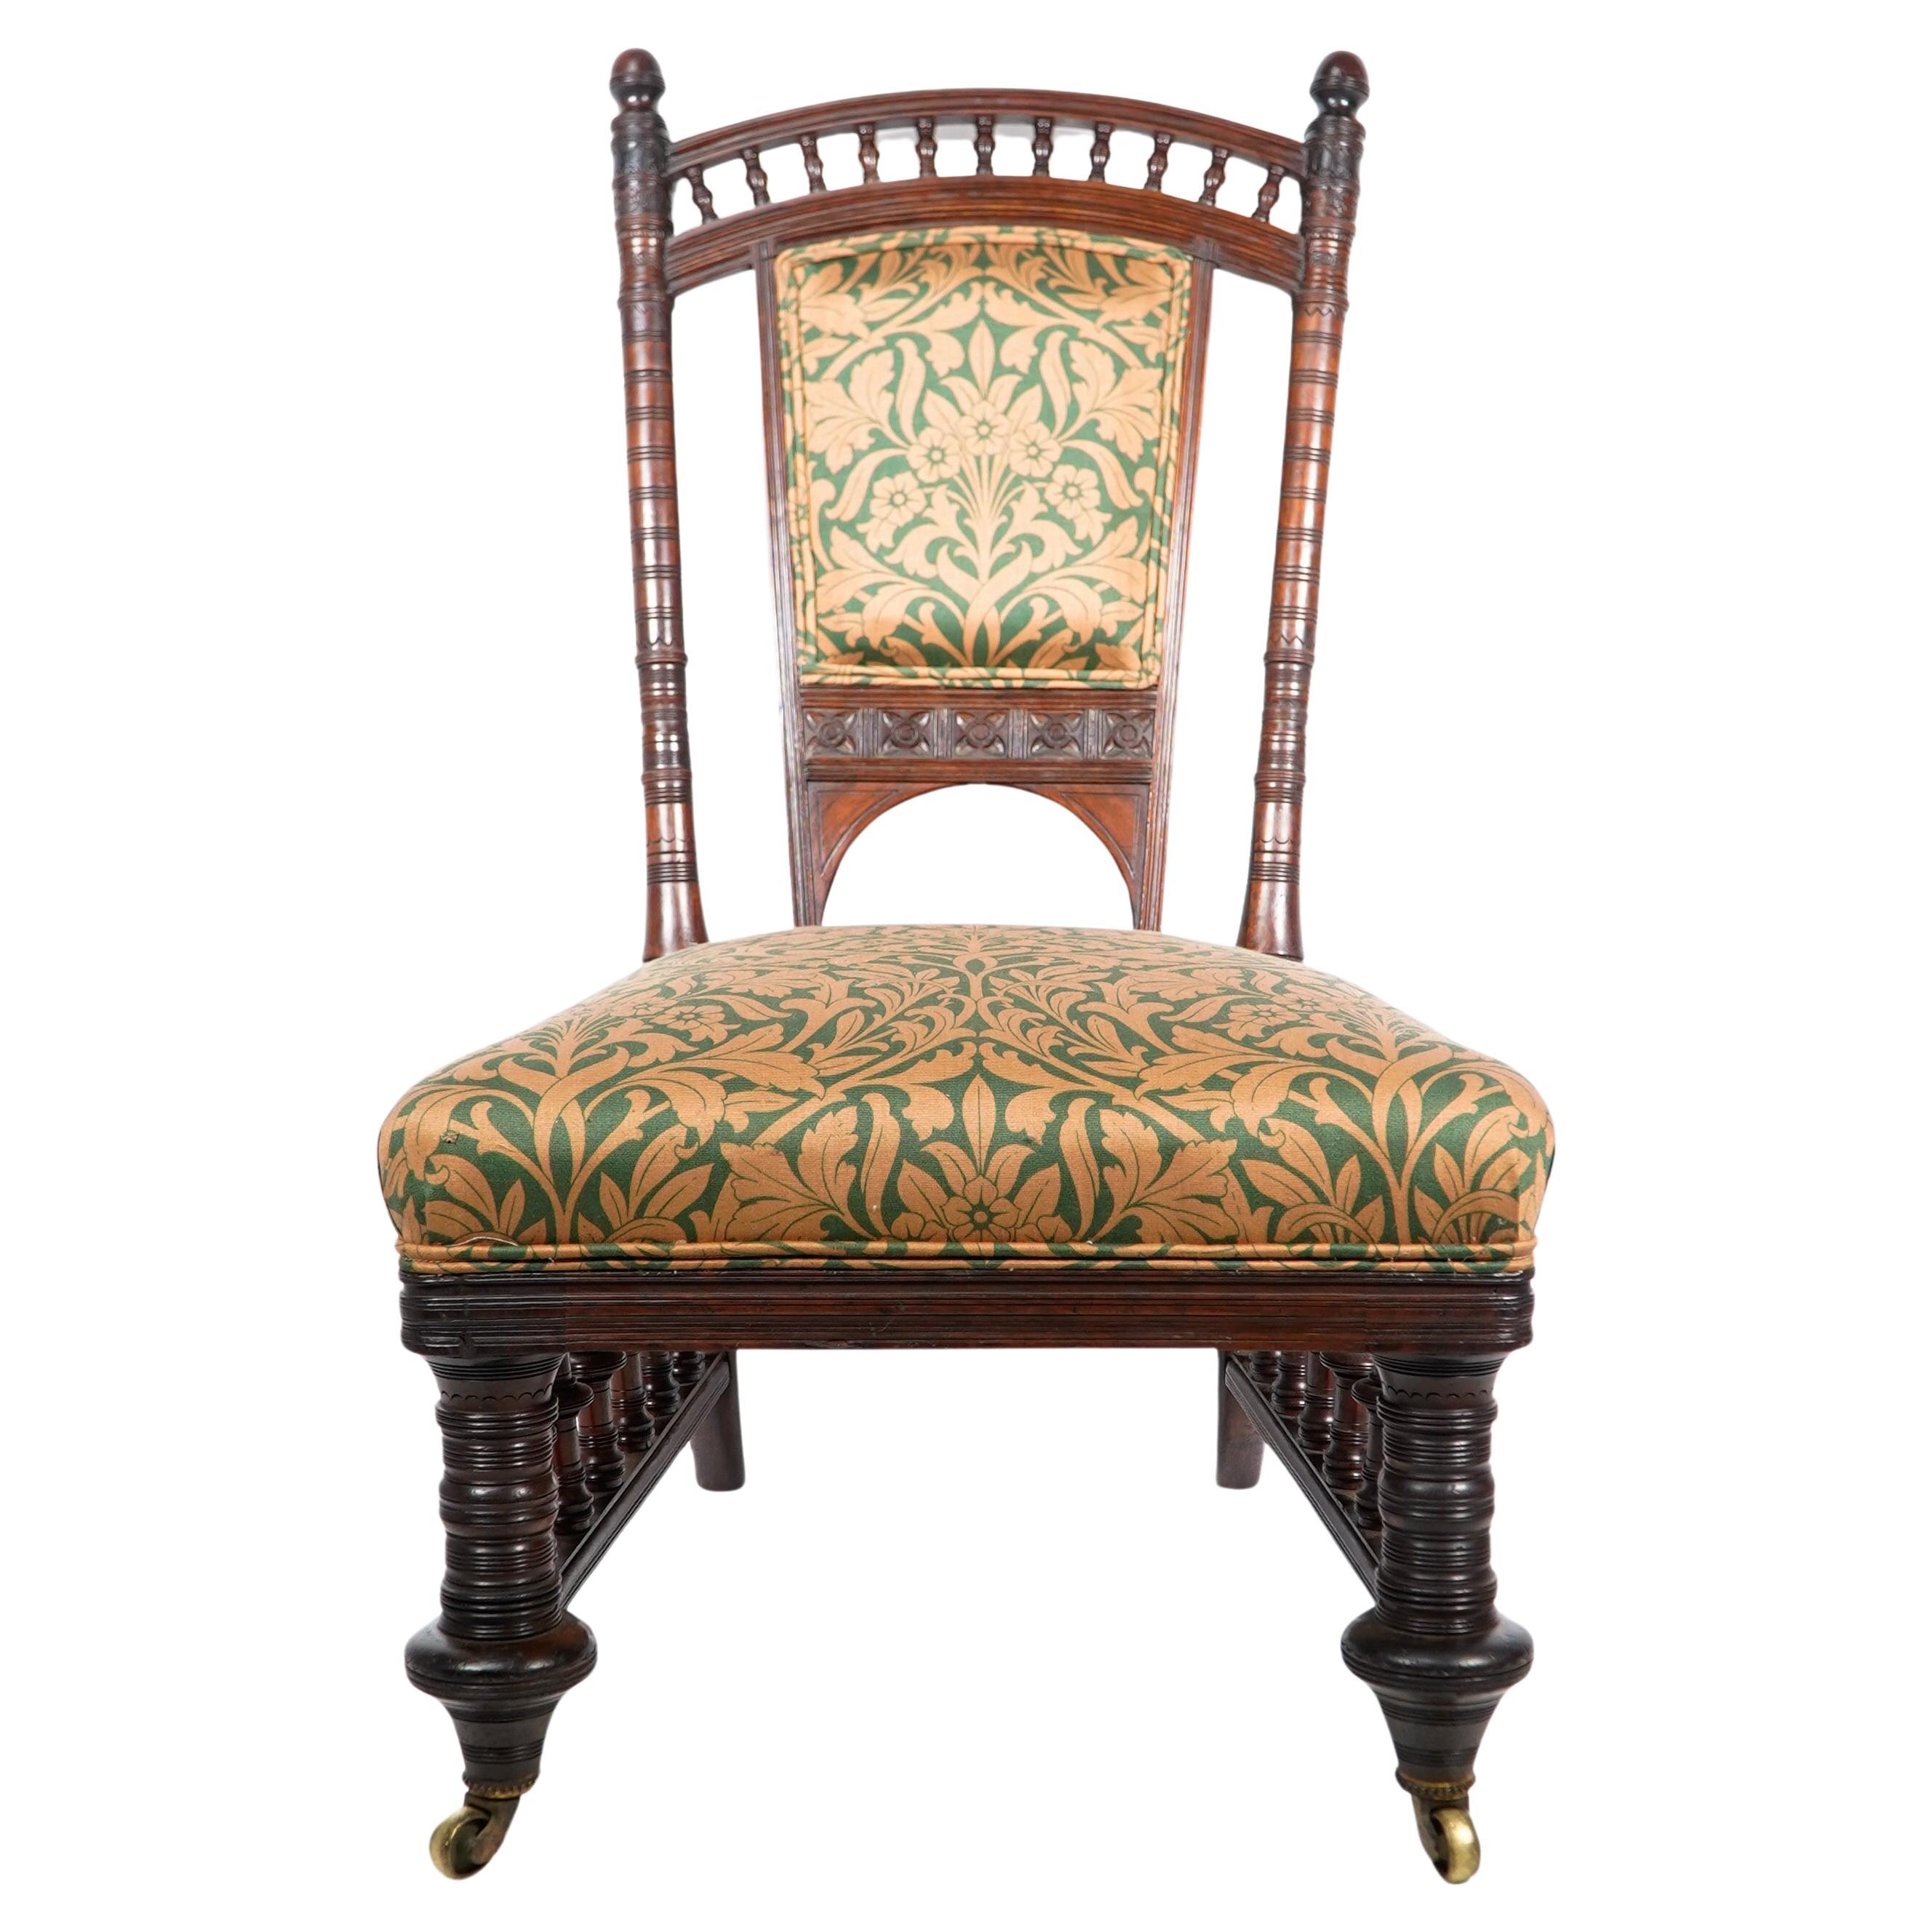 Collinson and Lock. A rare Aesthetic Movement Rosewood side chair with finely carved and turned details to the back supports with exagerated disc turned front legs and conforming side galleries below the seat. Professionally upholstered.
